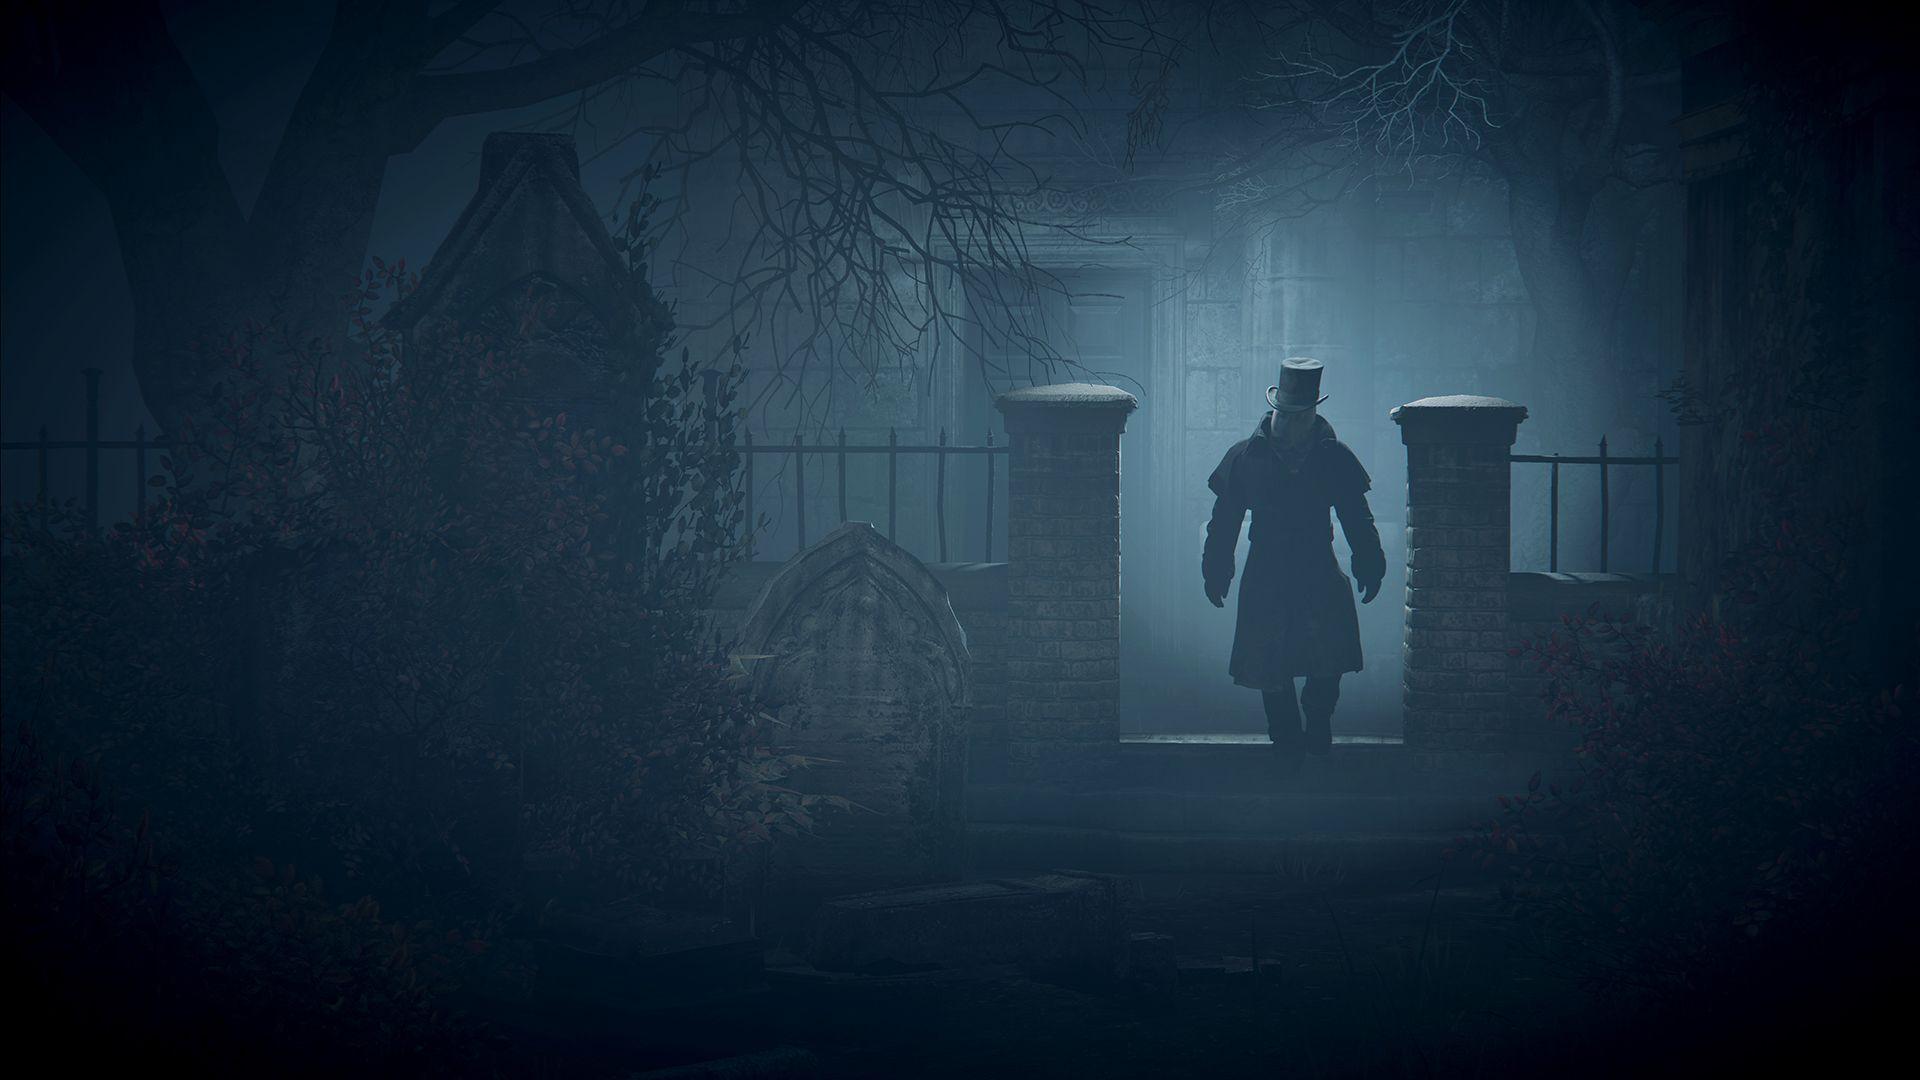 john the ripper download for pc